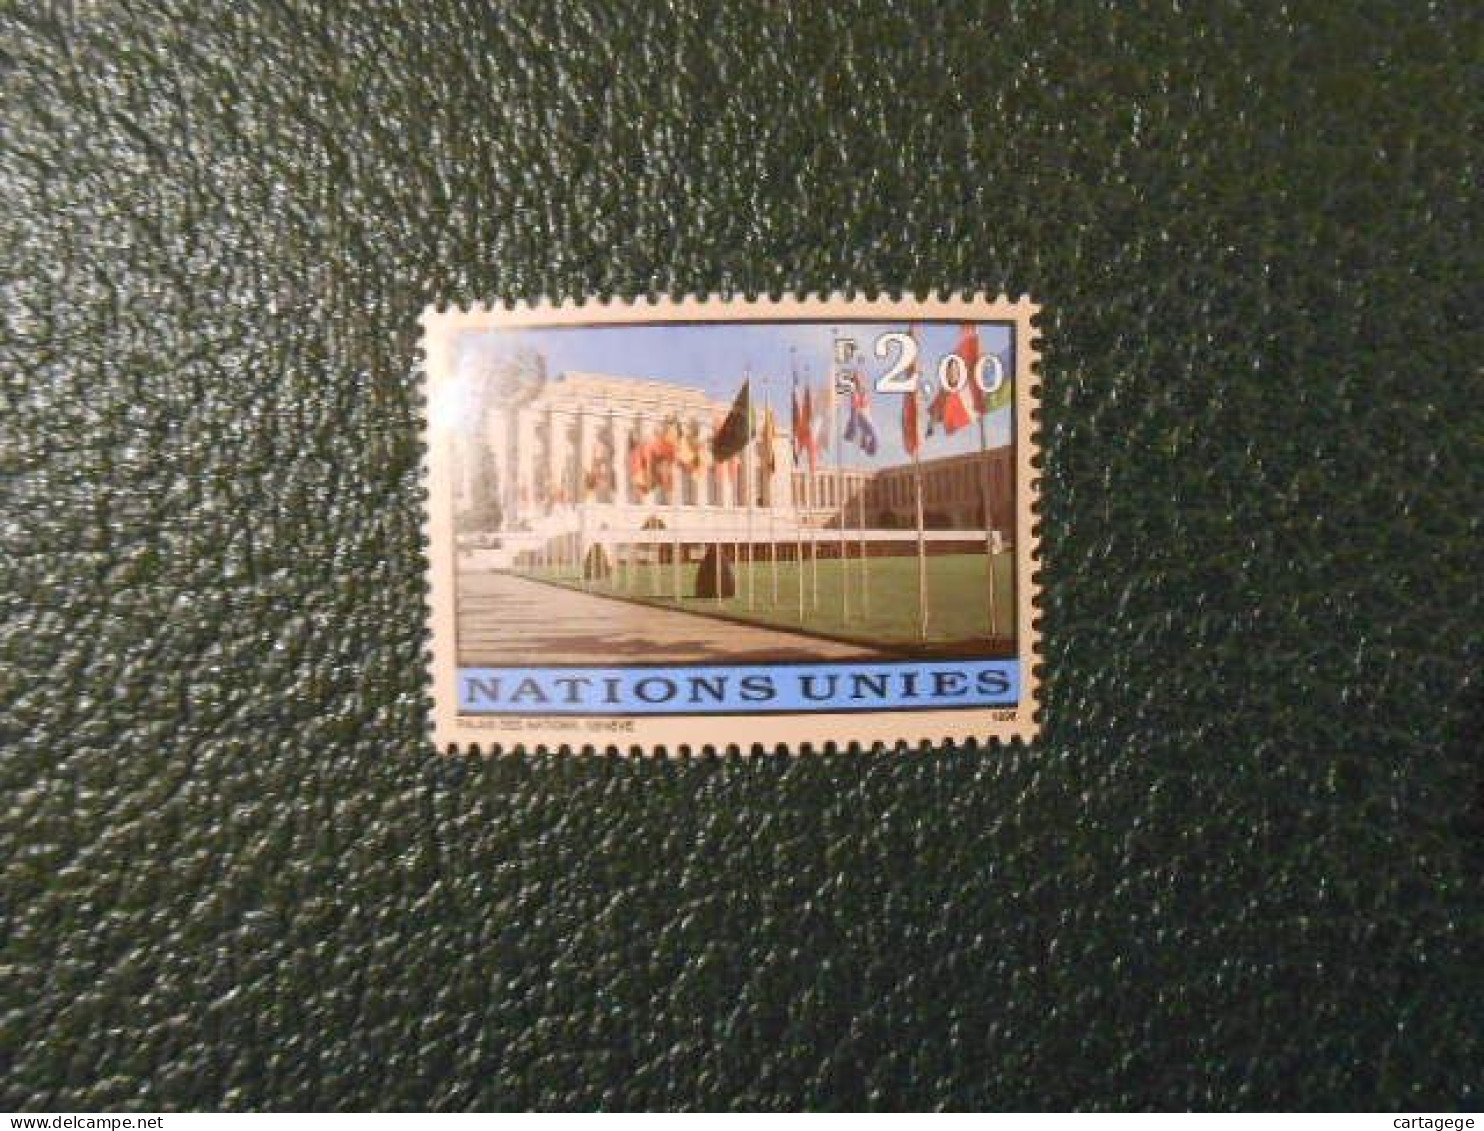 NATIONS-UNIES GENEVE YT  348 SERIE COURANTE** - Unused Stamps